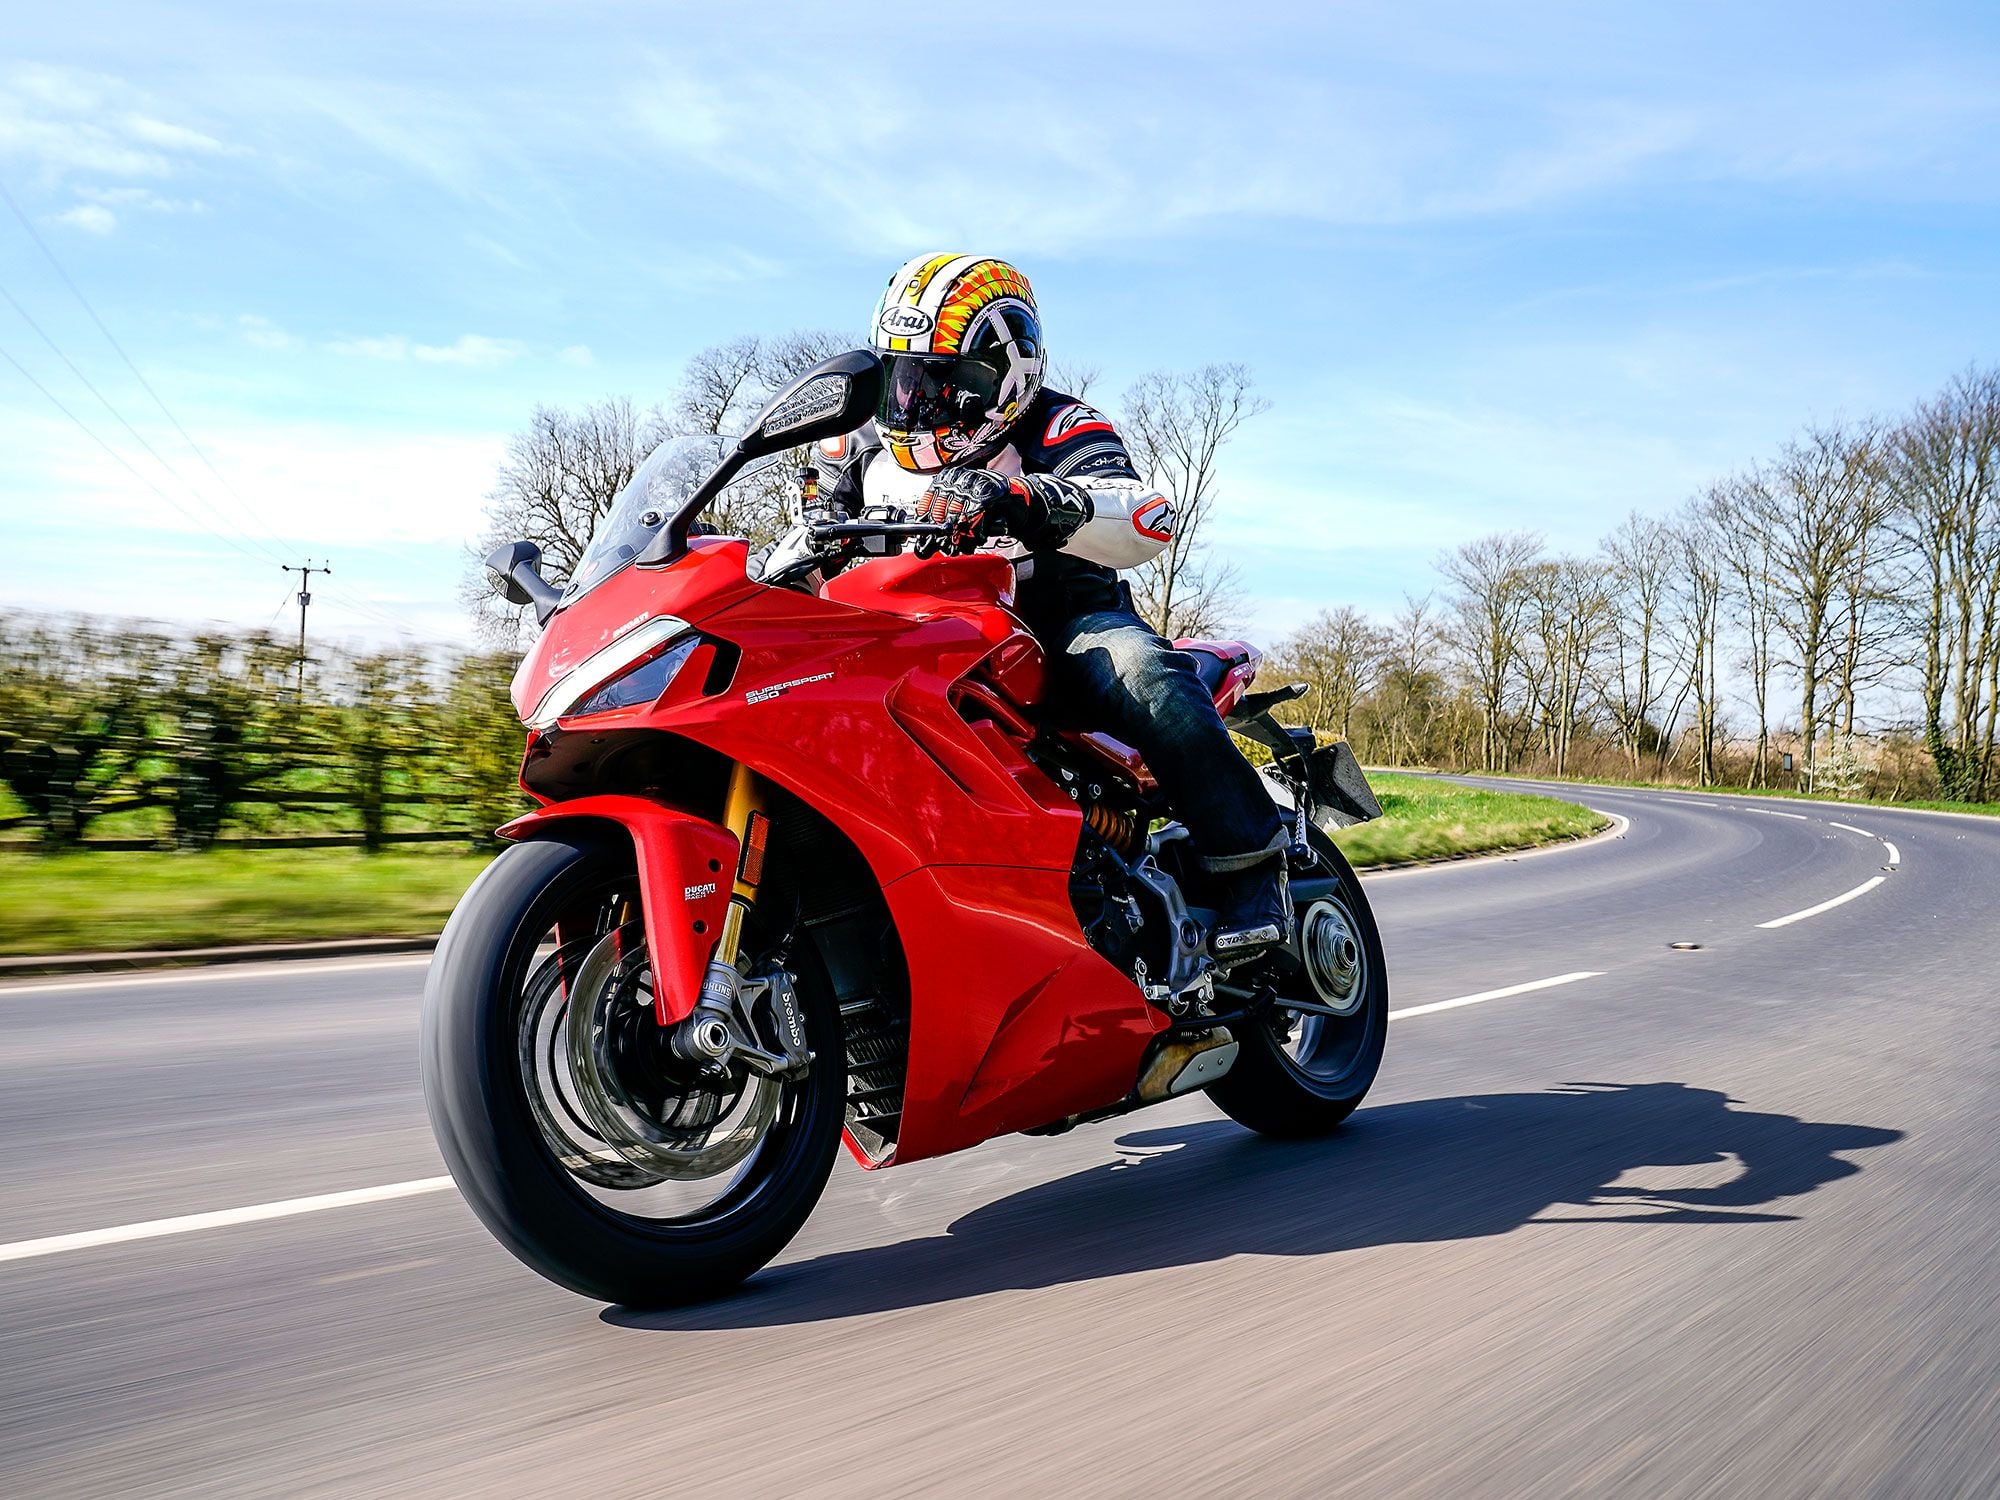 Unlike the V4 Panigale, the SuperSport is staying with a traditional steel trellis frame, using the engine as a structural part of the chassis. The main steel trellis is connected to the cylinder heads, while the rear seat post subframe is fixed to the rear cylinder.